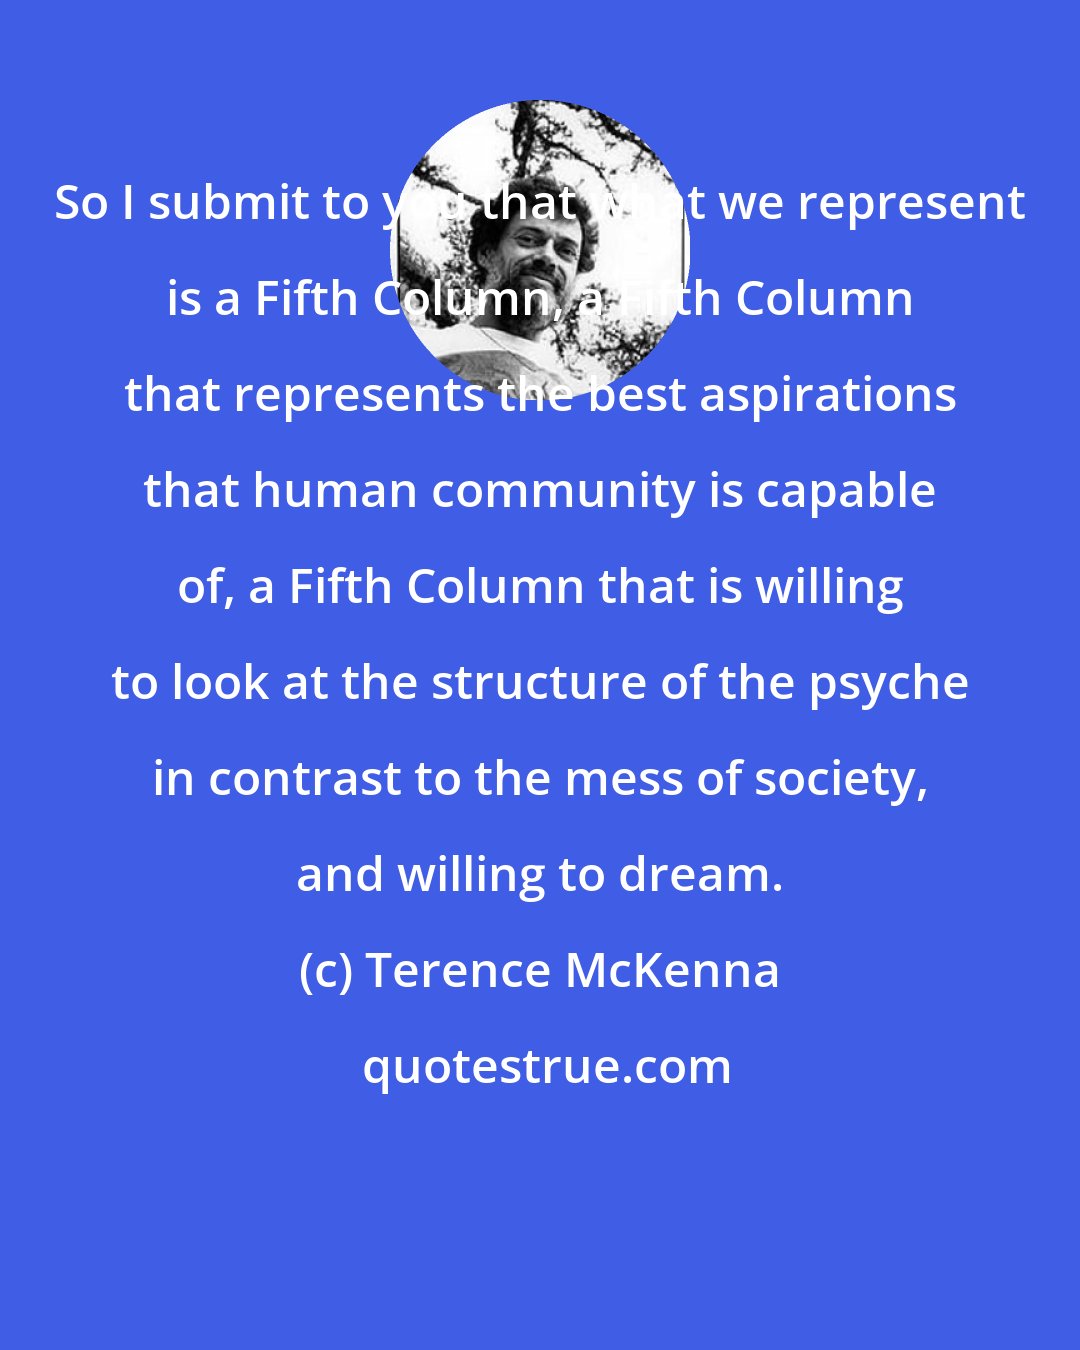 Terence McKenna: So I submit to you that what we represent is a Fifth Column, a Fifth Column that represents the best aspirations that human community is capable of, a Fifth Column that is willing to look at the structure of the psyche in contrast to the mess of society, and willing to dream.